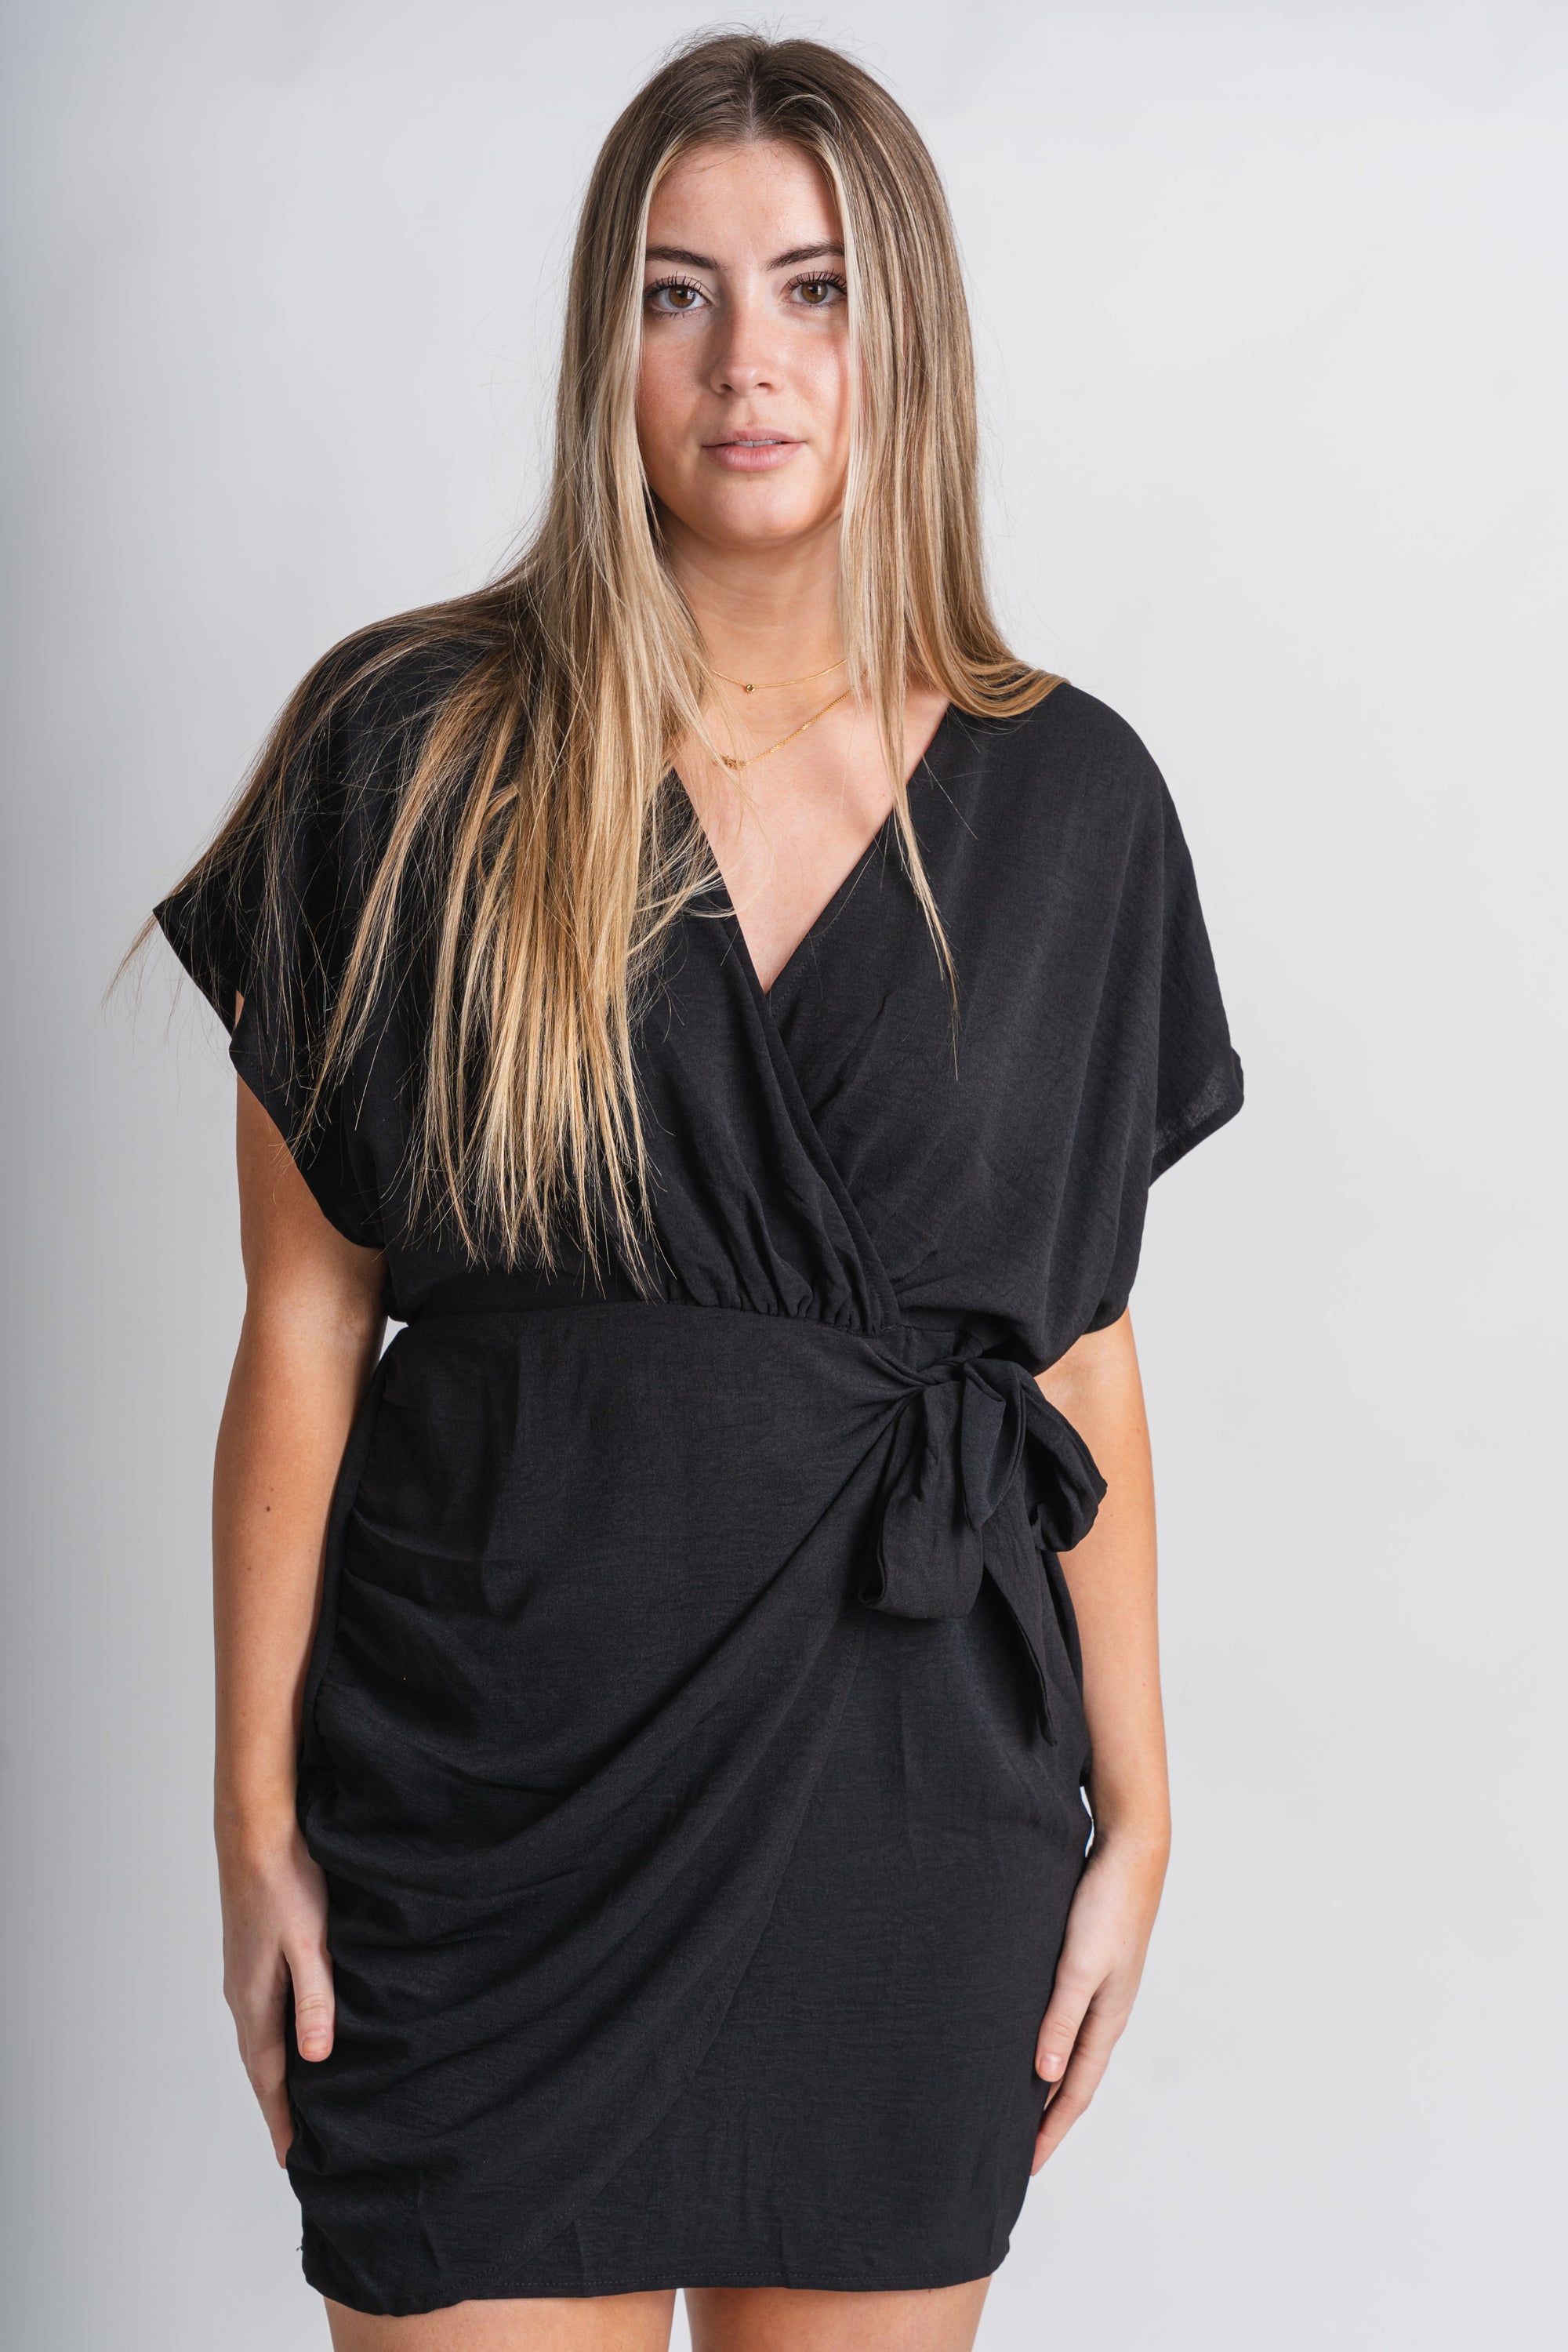 Dolman sleeve vneck dress black - Trendy dress - Cute Vacation Collection at Lush Fashion Lounge Boutique in Oklahoma City